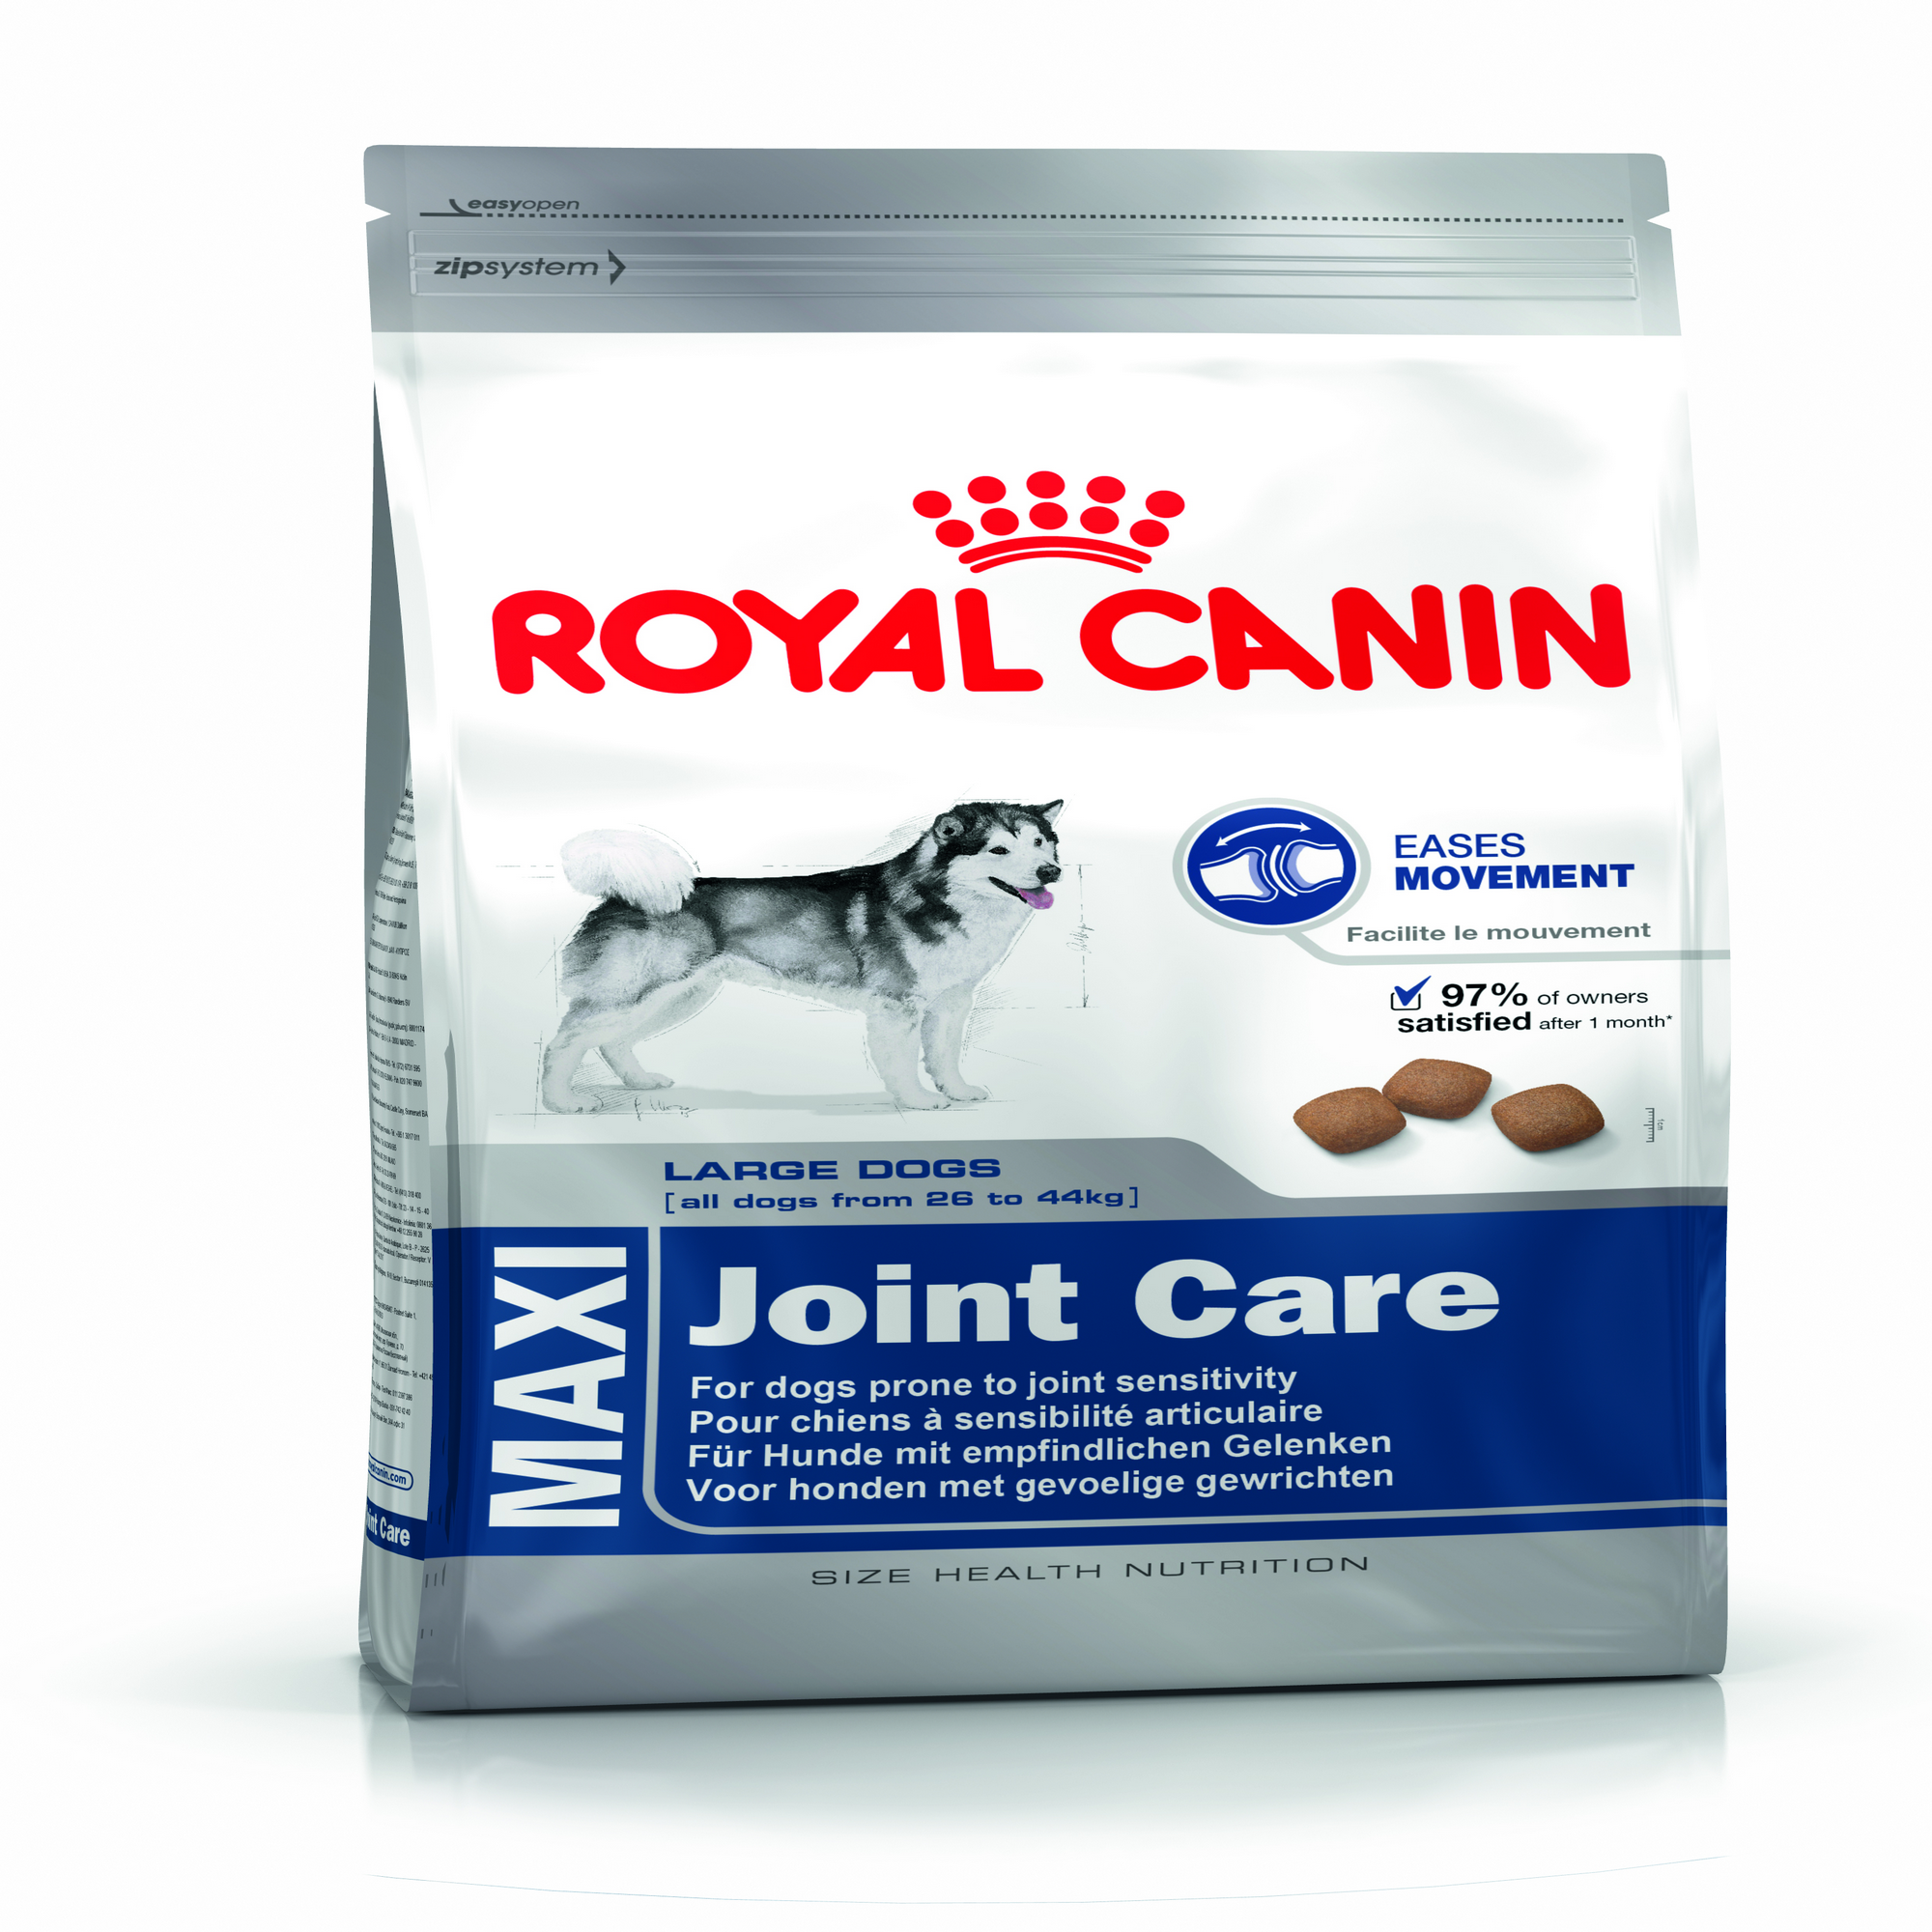 Royal Canin MAXI Joint Care 3 Kg + product picture